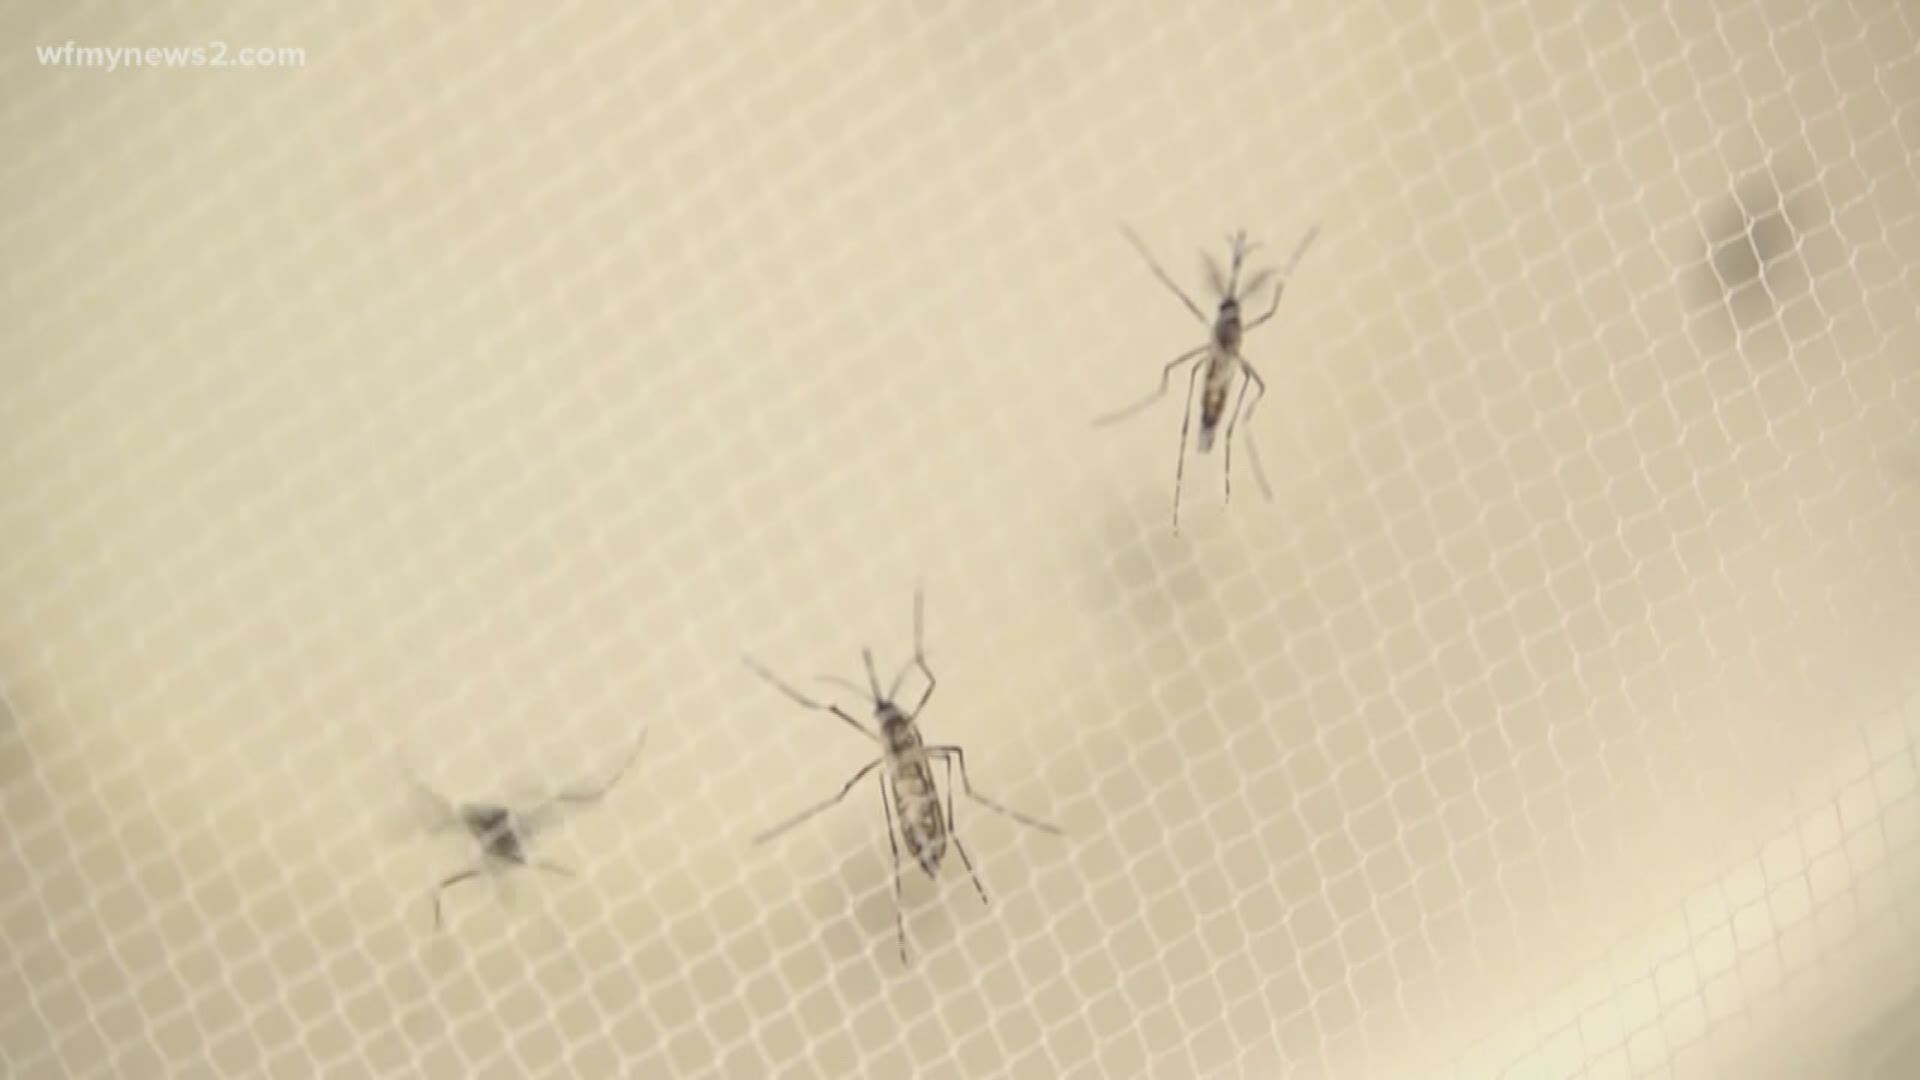 Health officials say you should use insect repellent with DEET